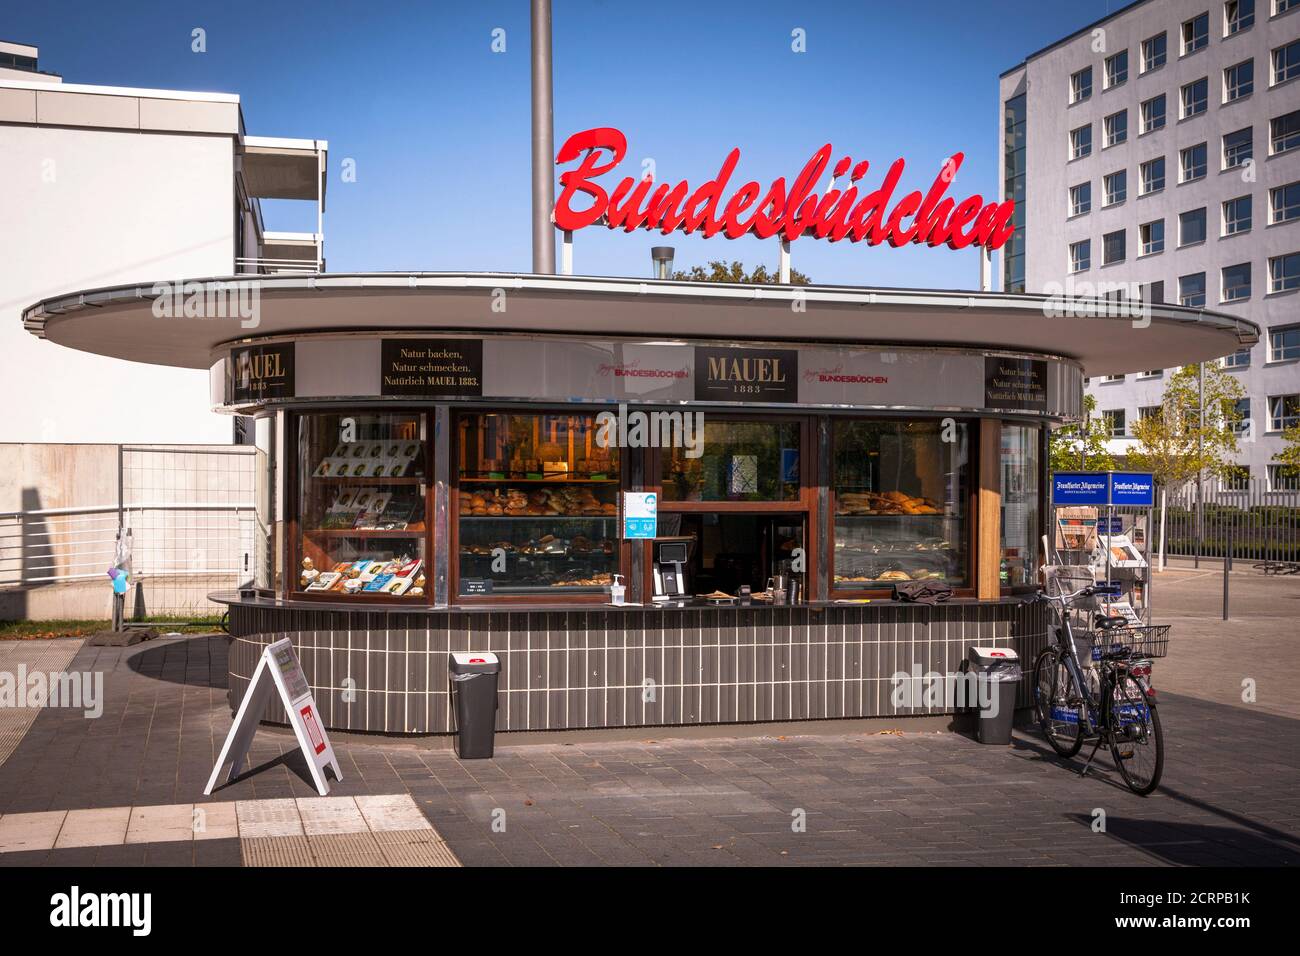 the Bundesbuedchen, historical newspaper kiosk in the former government district, Bonn, North Rhine-Westphalia, Germany.  das Bundesbuedchen, historis Stock Photo